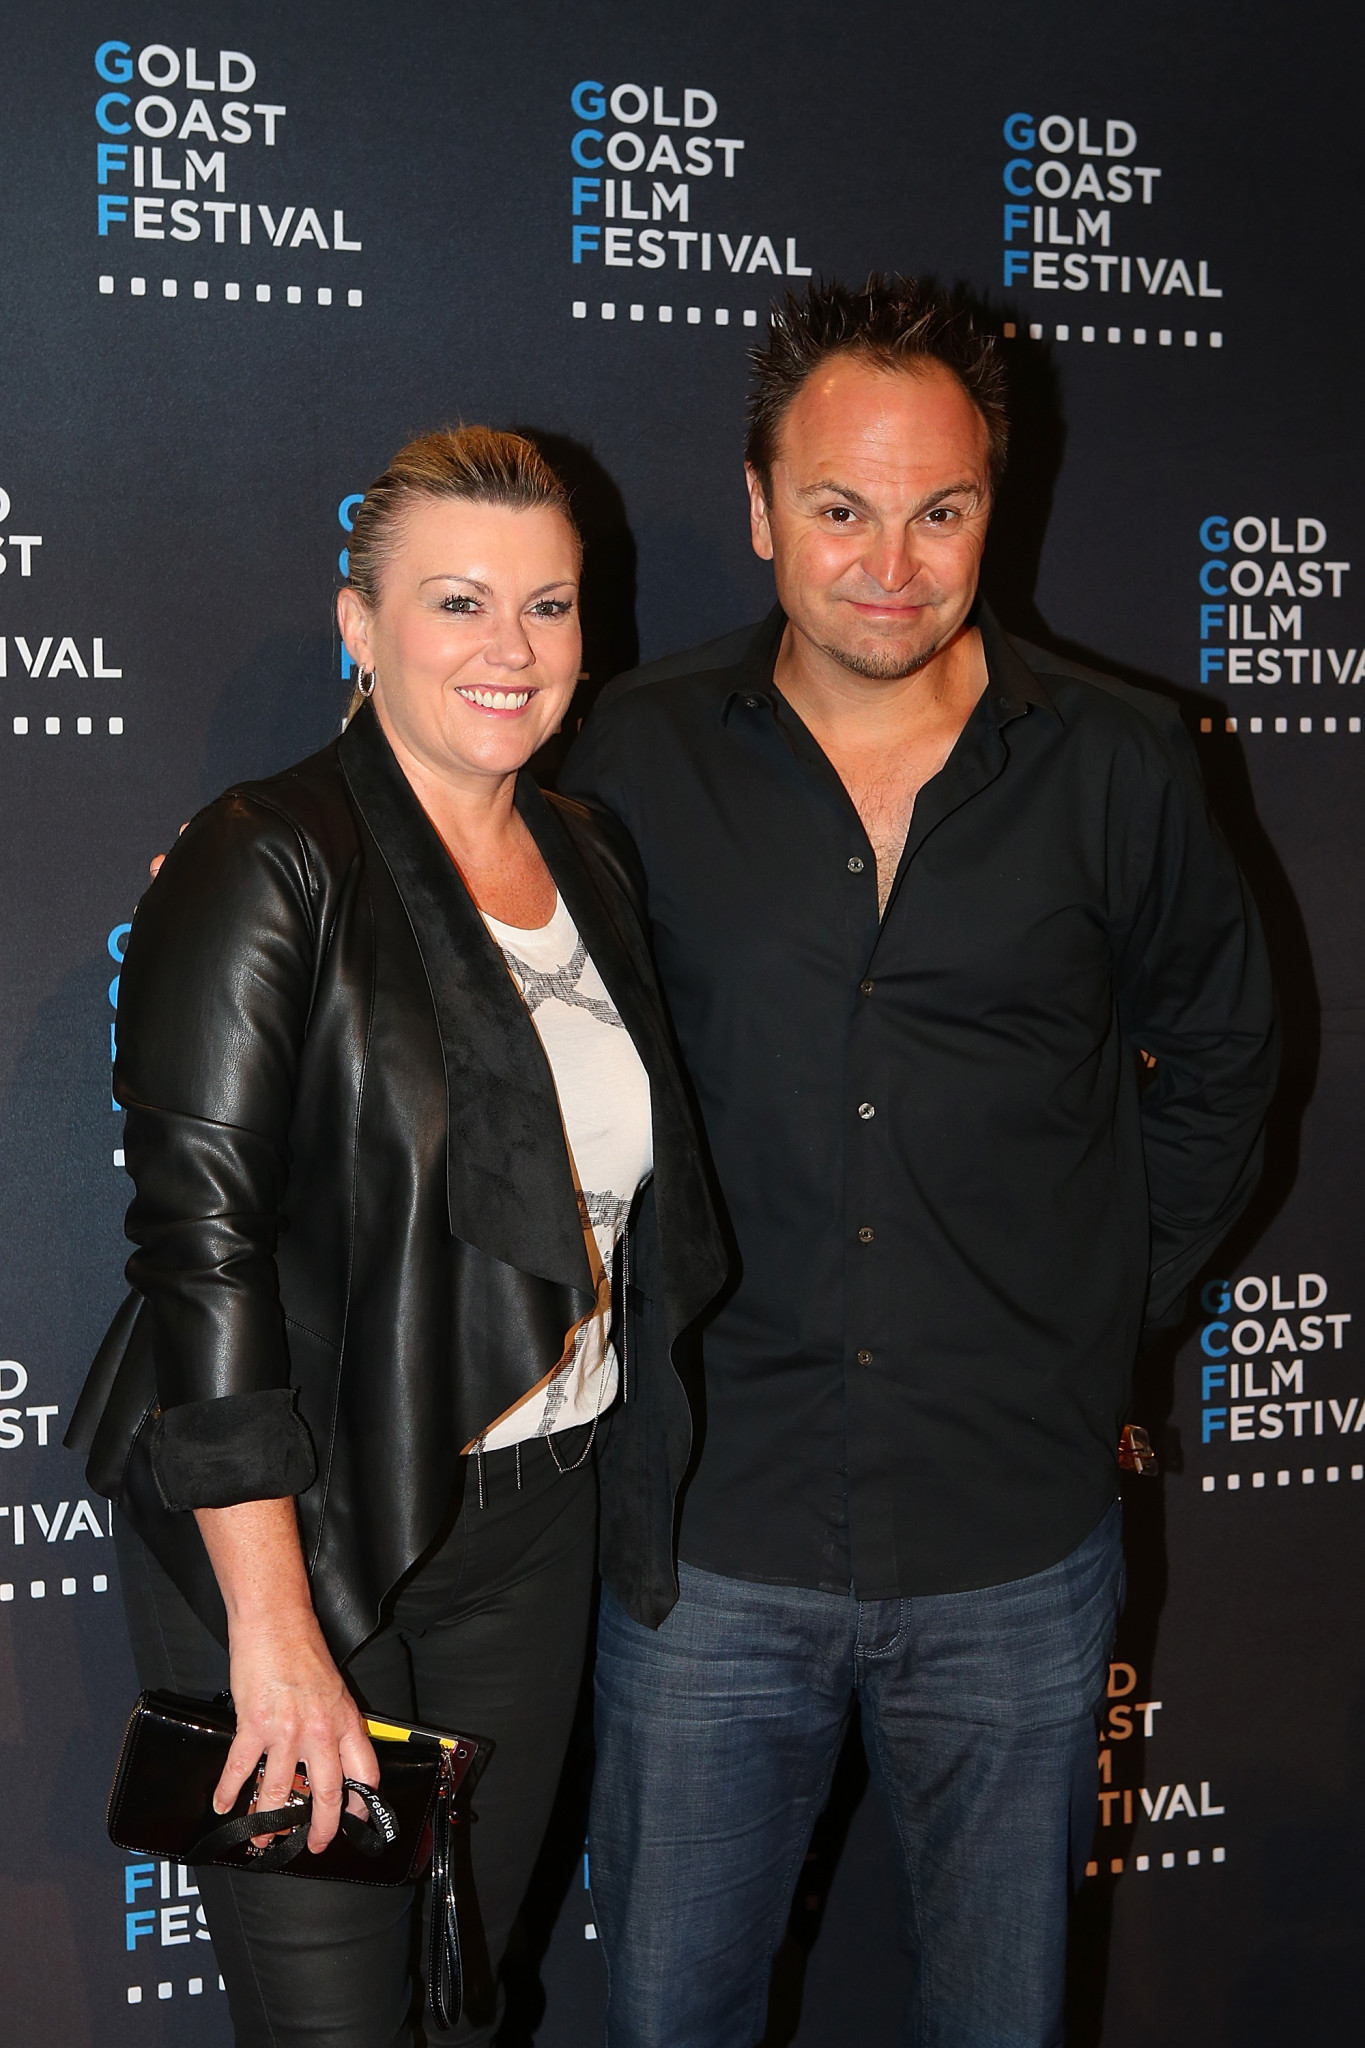 Australia's first Winter Olympic champion Steven Bradbury and wife at the opening night of the 2016 Gold Coast Film Festival. Now a film is being planned about his life, entitled Last Man Standing ©Getty Images